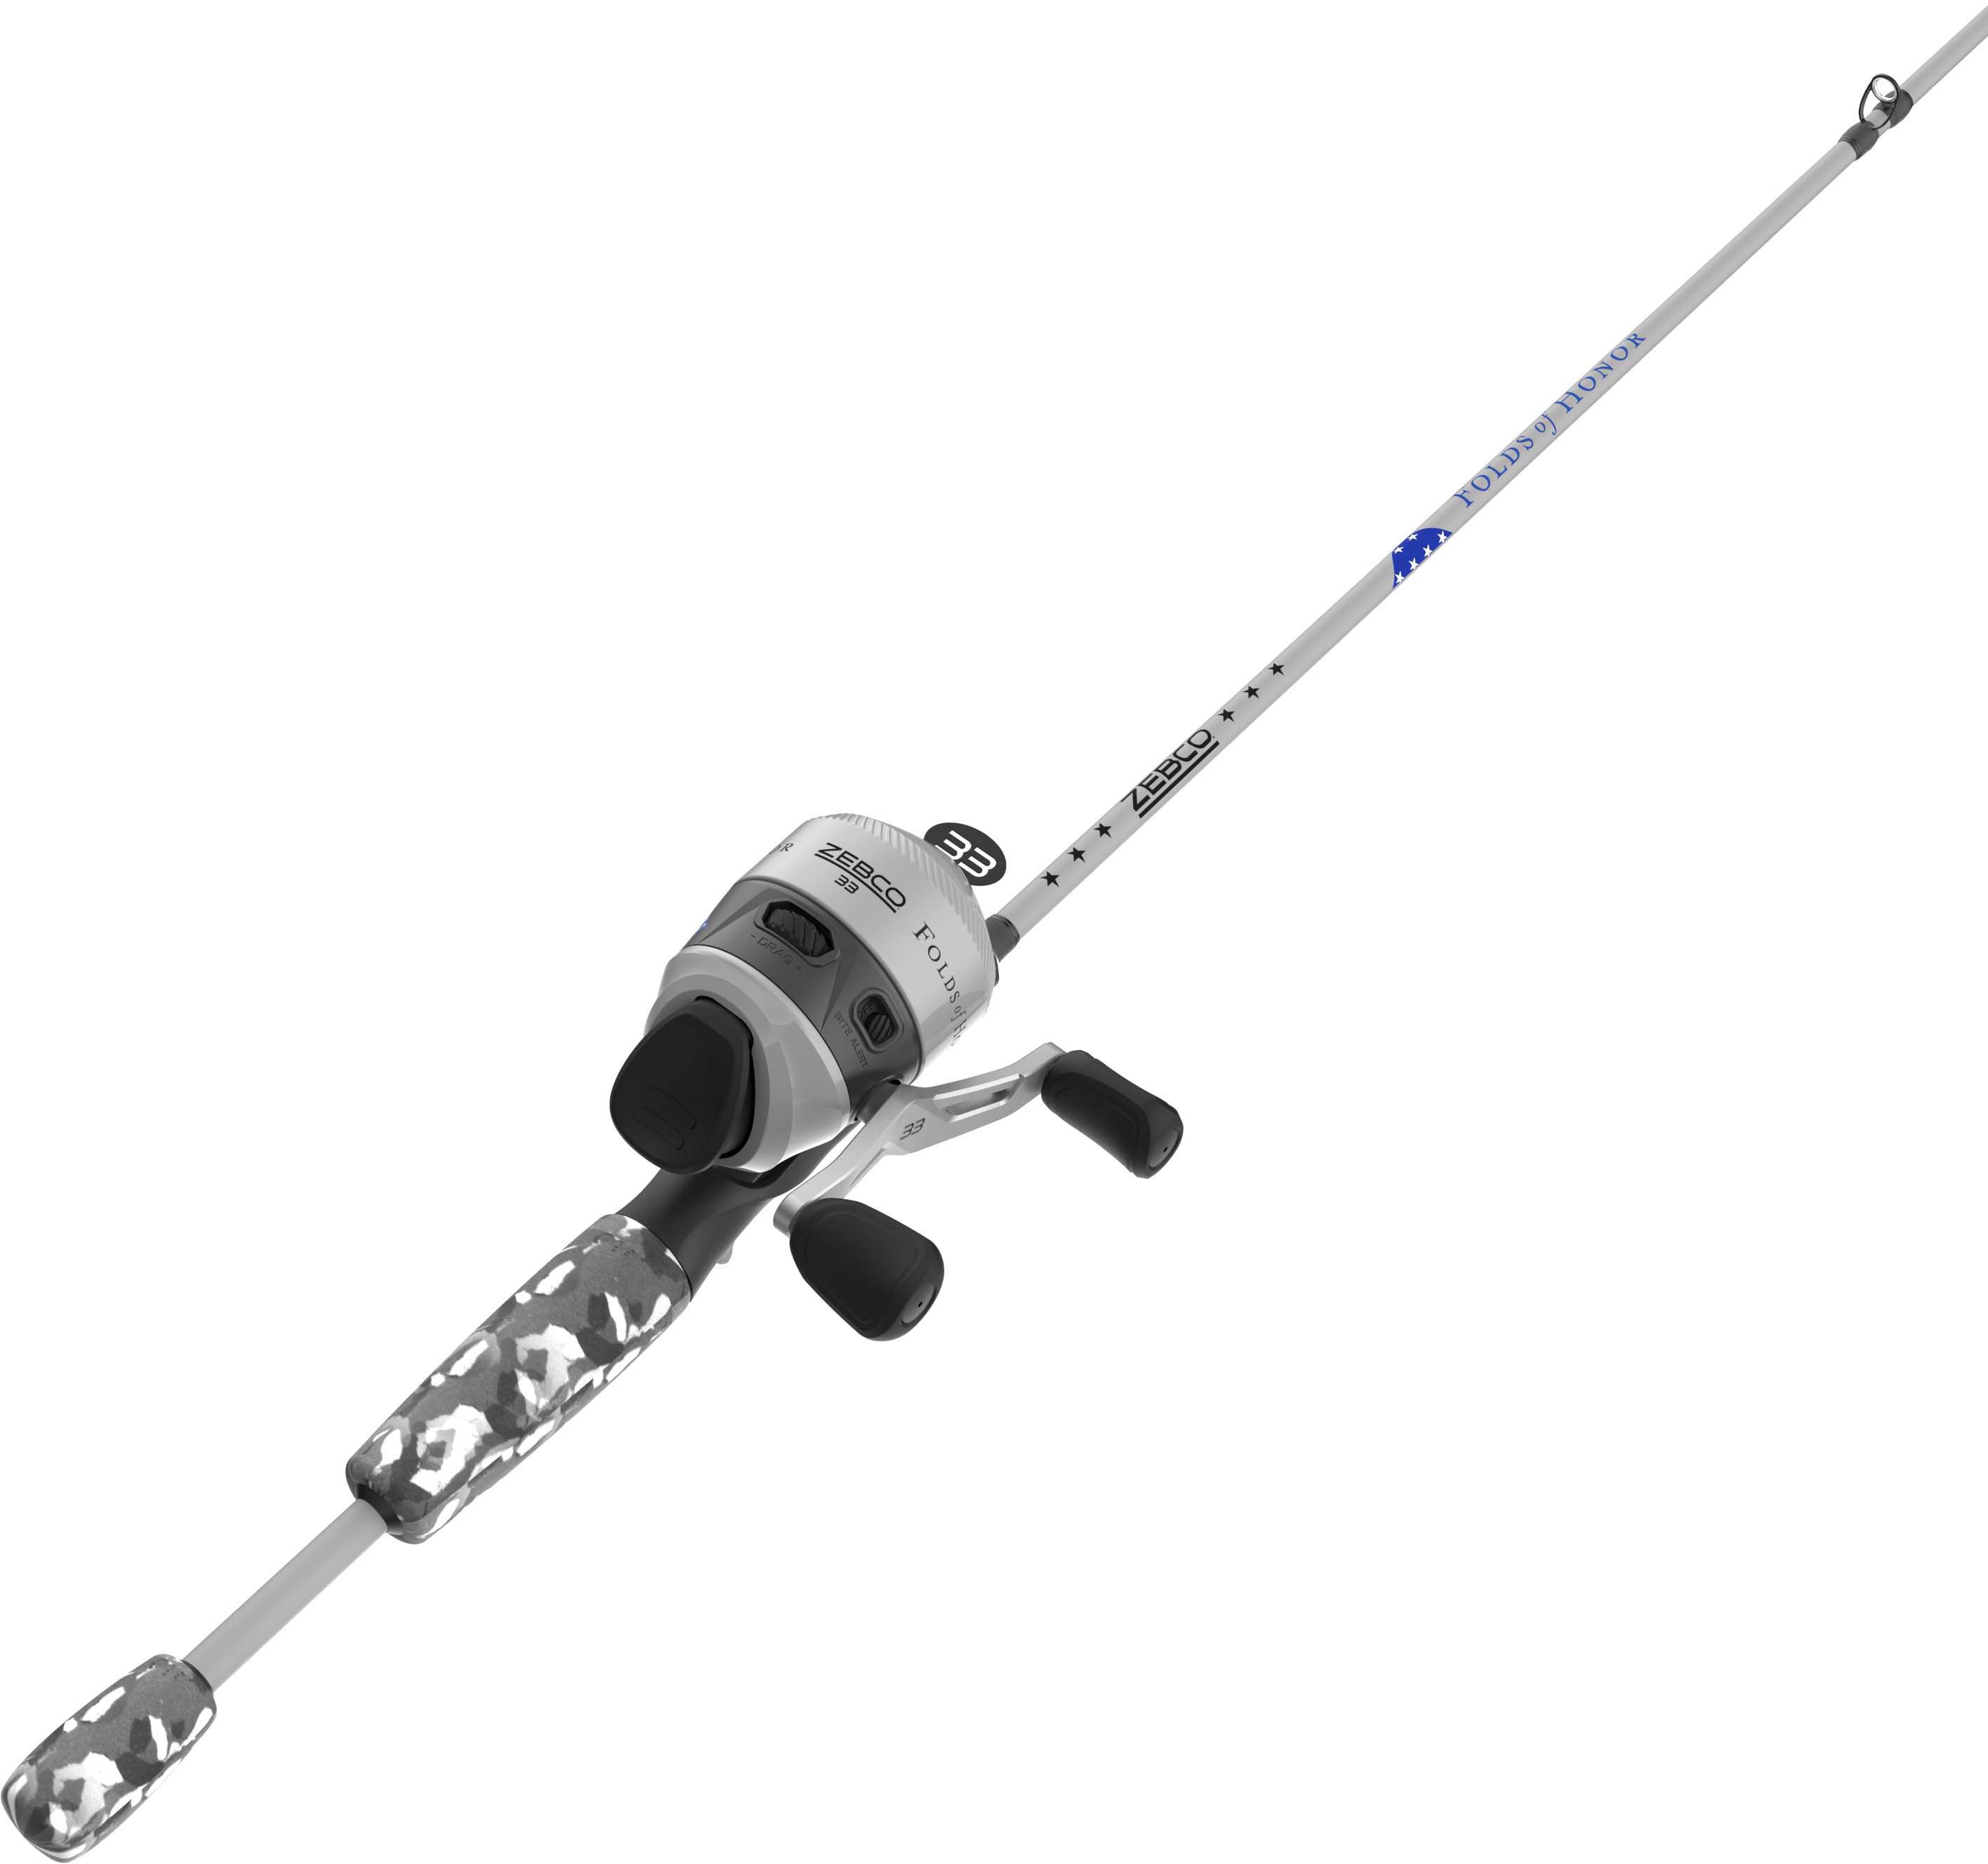 Zebco Folds Of Honor Spincast Combo Rod 33602MFOHC.NS4 with Free S&H —  CampSaver